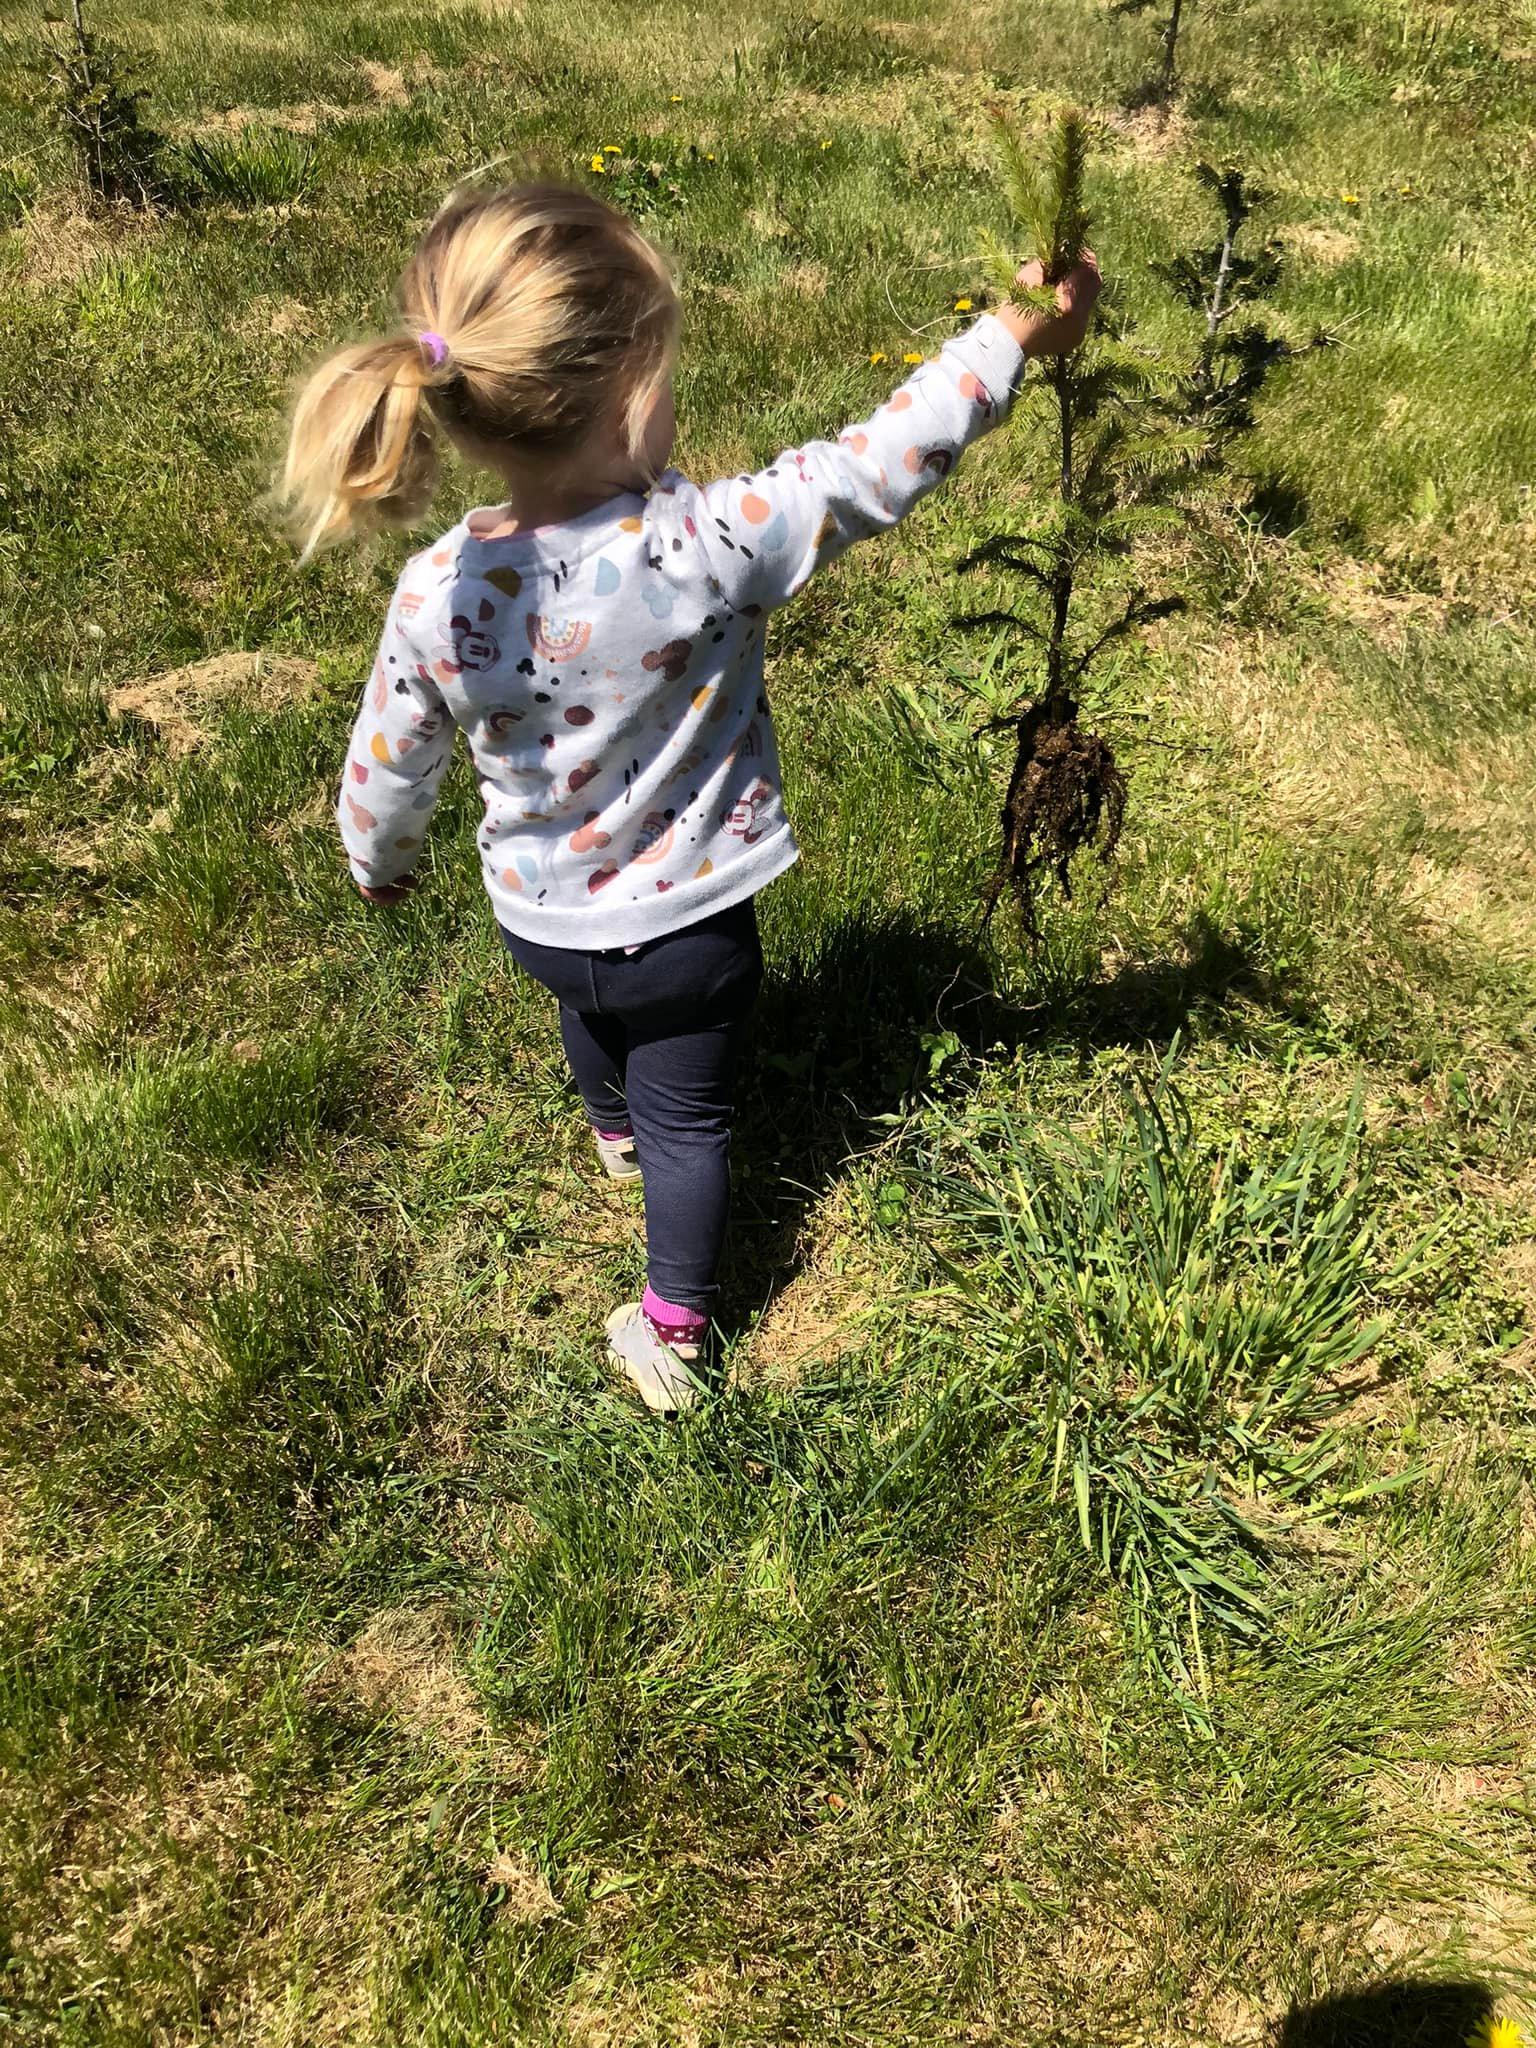 Two and a half year old Meghan is walking away from the camera, carefully holding up a young pine tree almost as tall as she is.